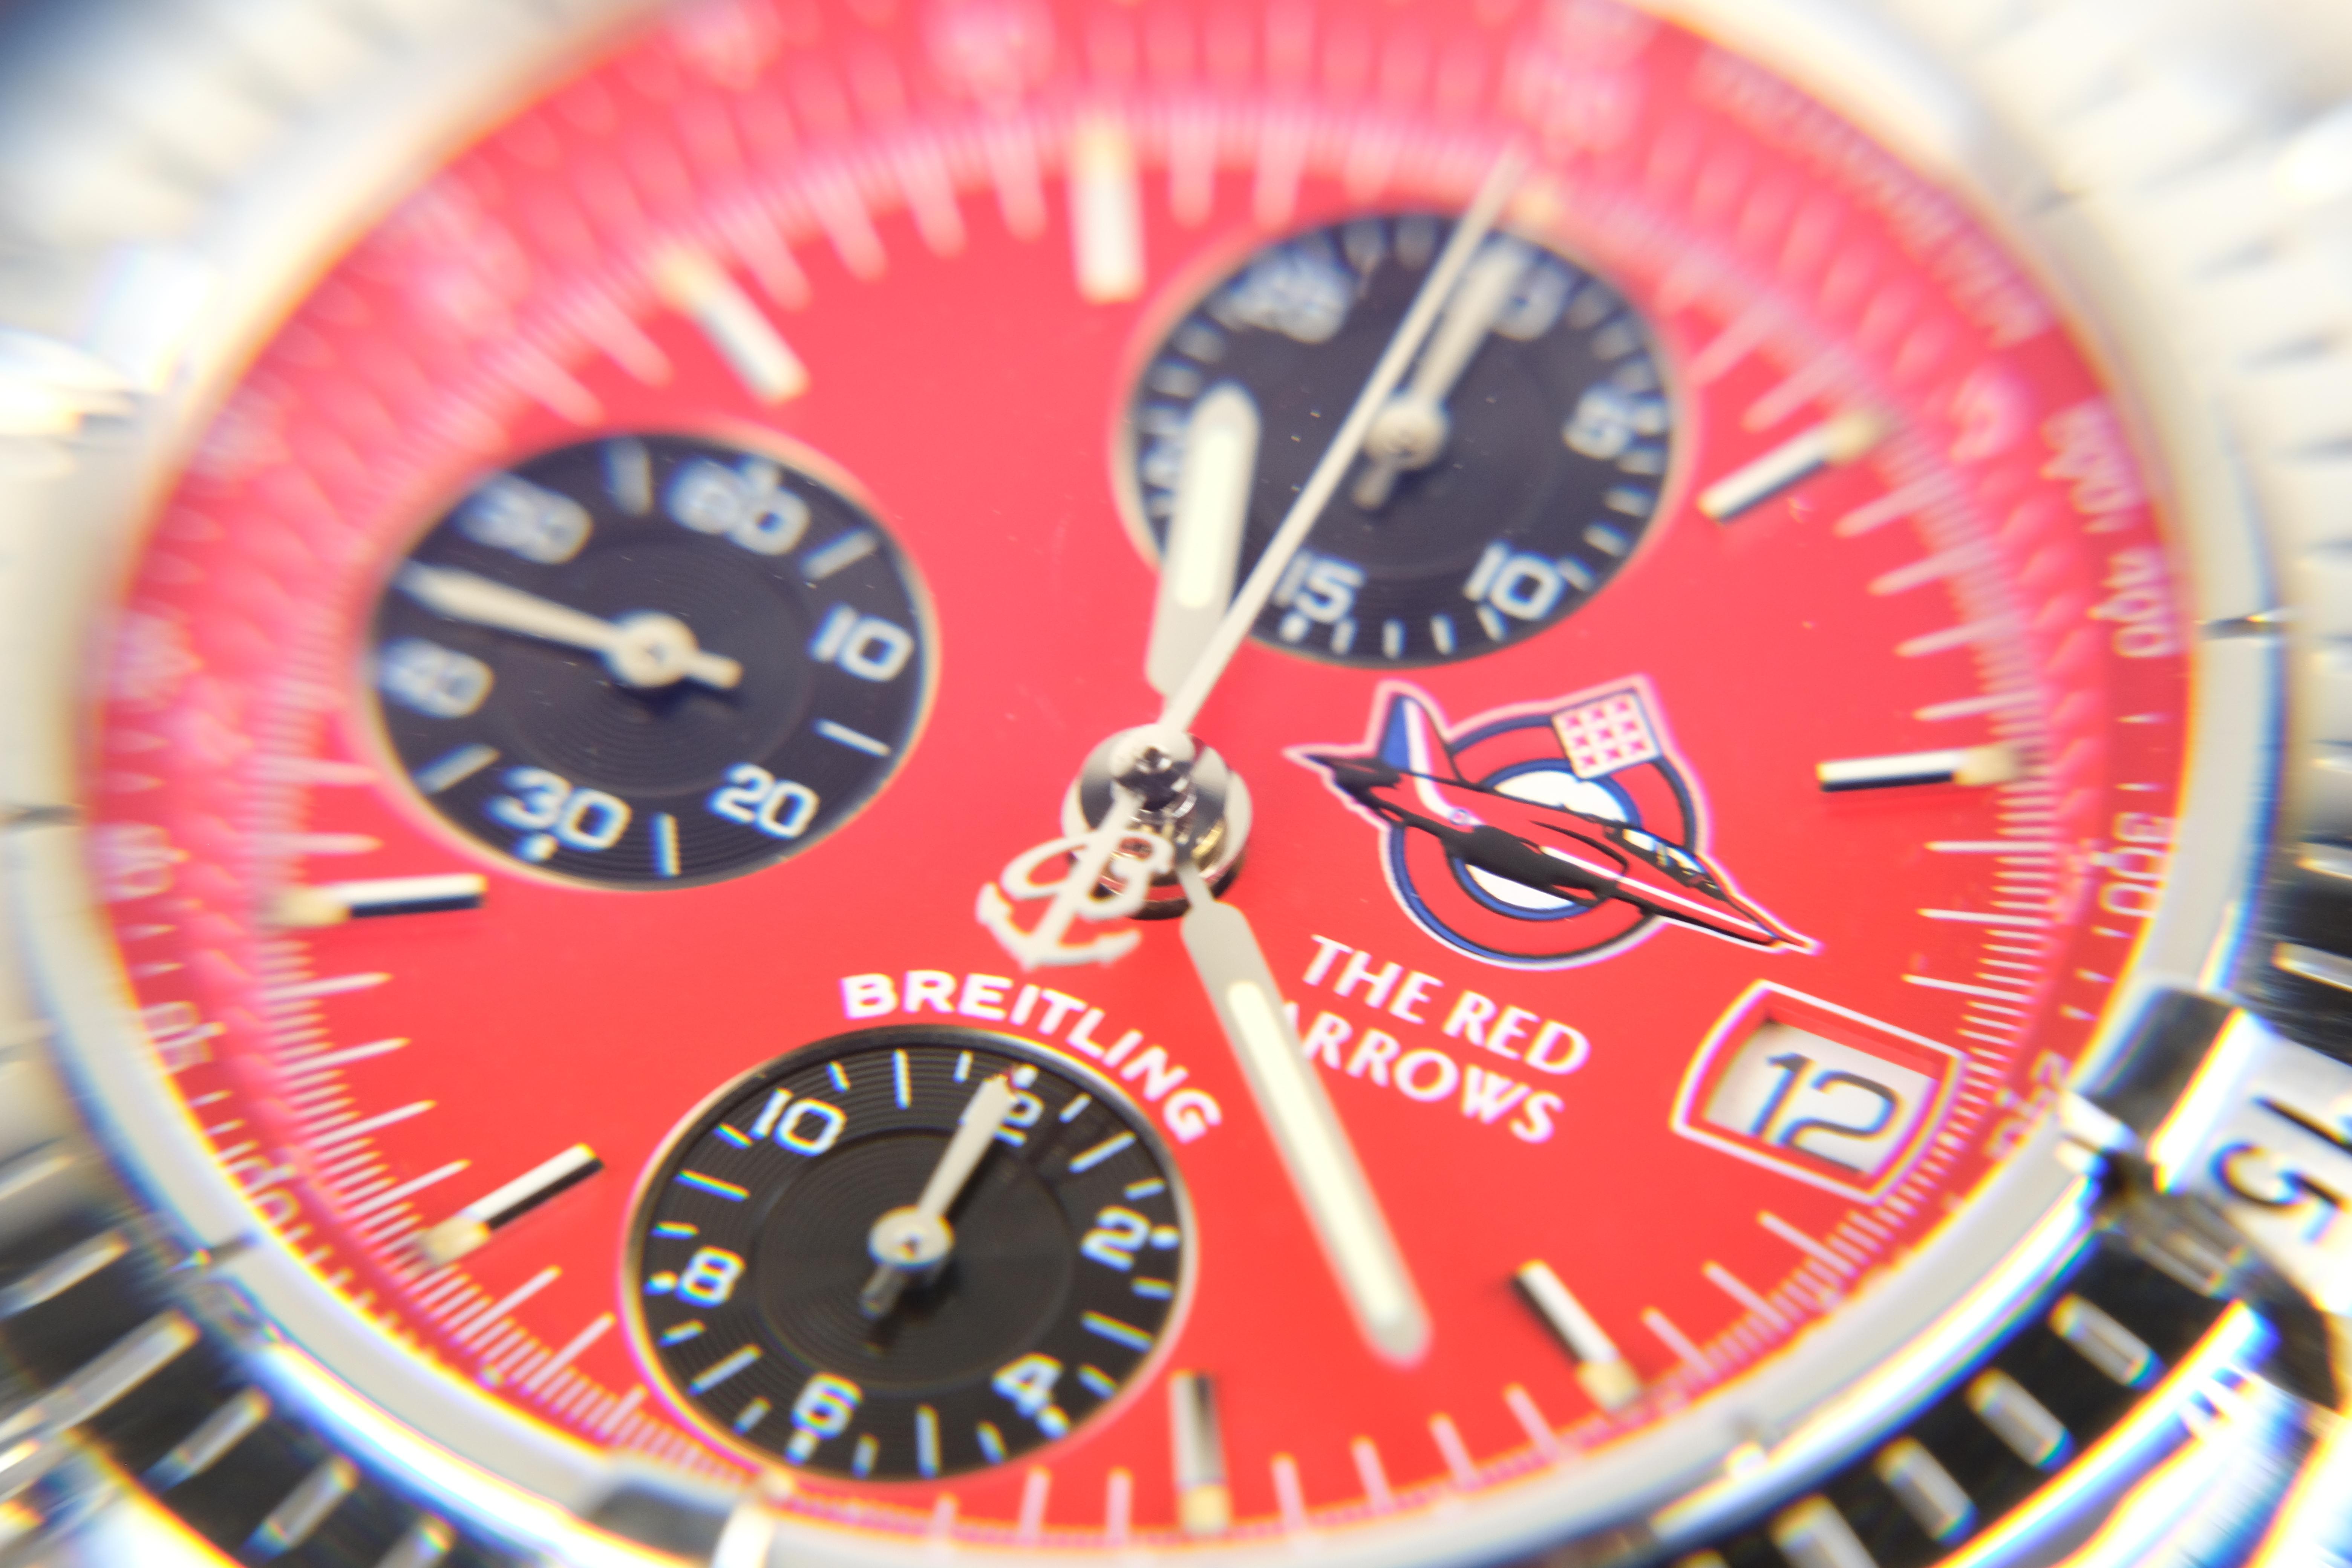 Breitling Chronomat Red Arrows Limited Edition Stainless Steel Wristwatch 4